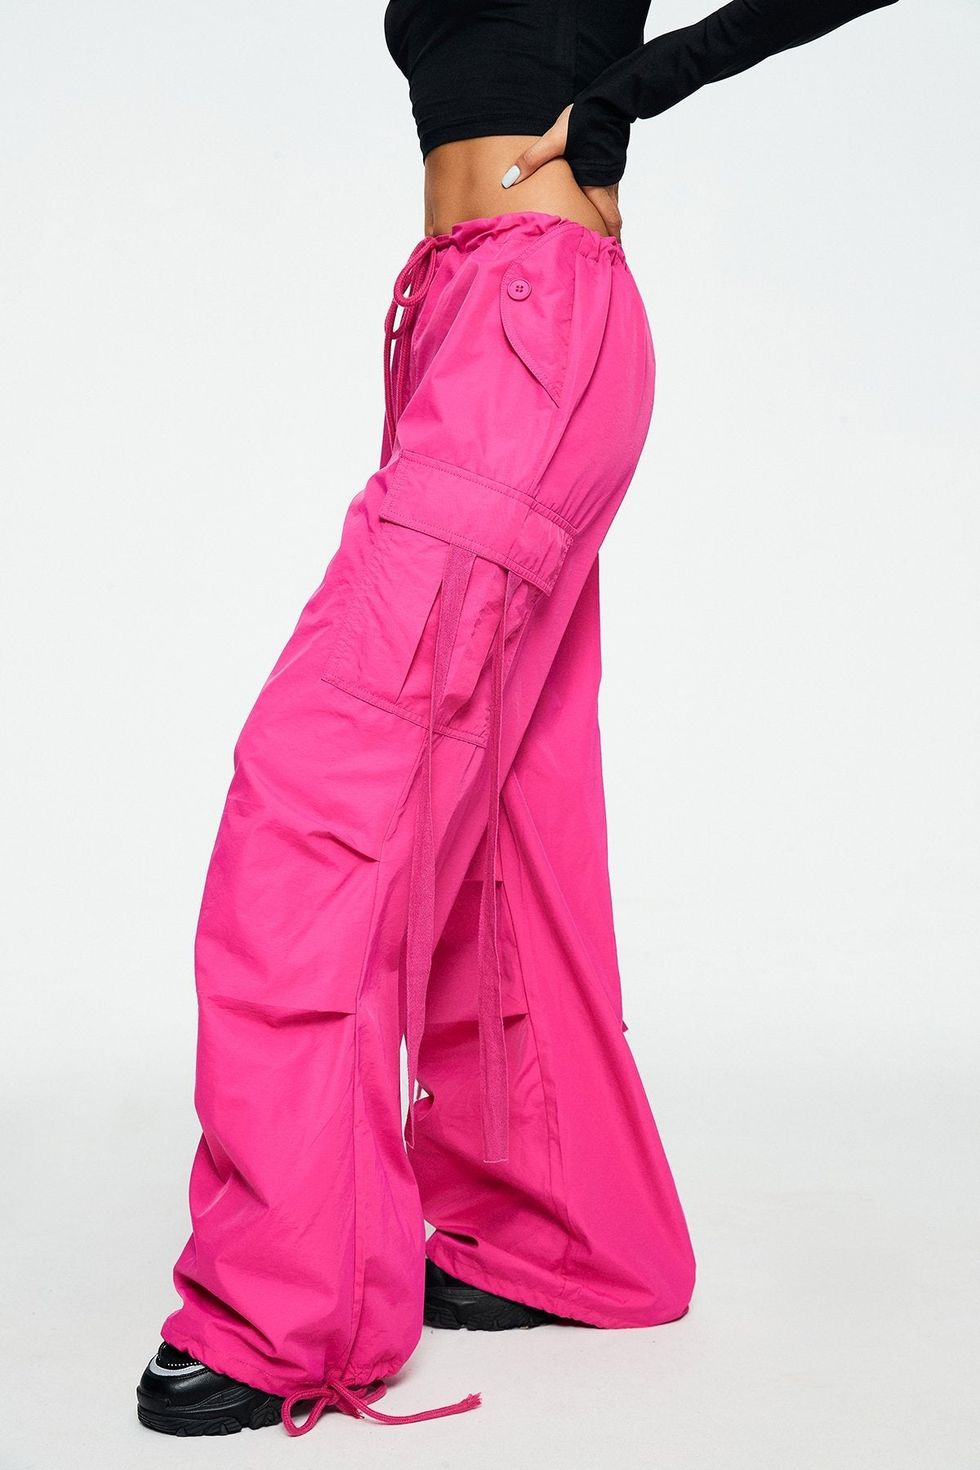 19 top Pink Cargo Pants for Women ideas in 2024